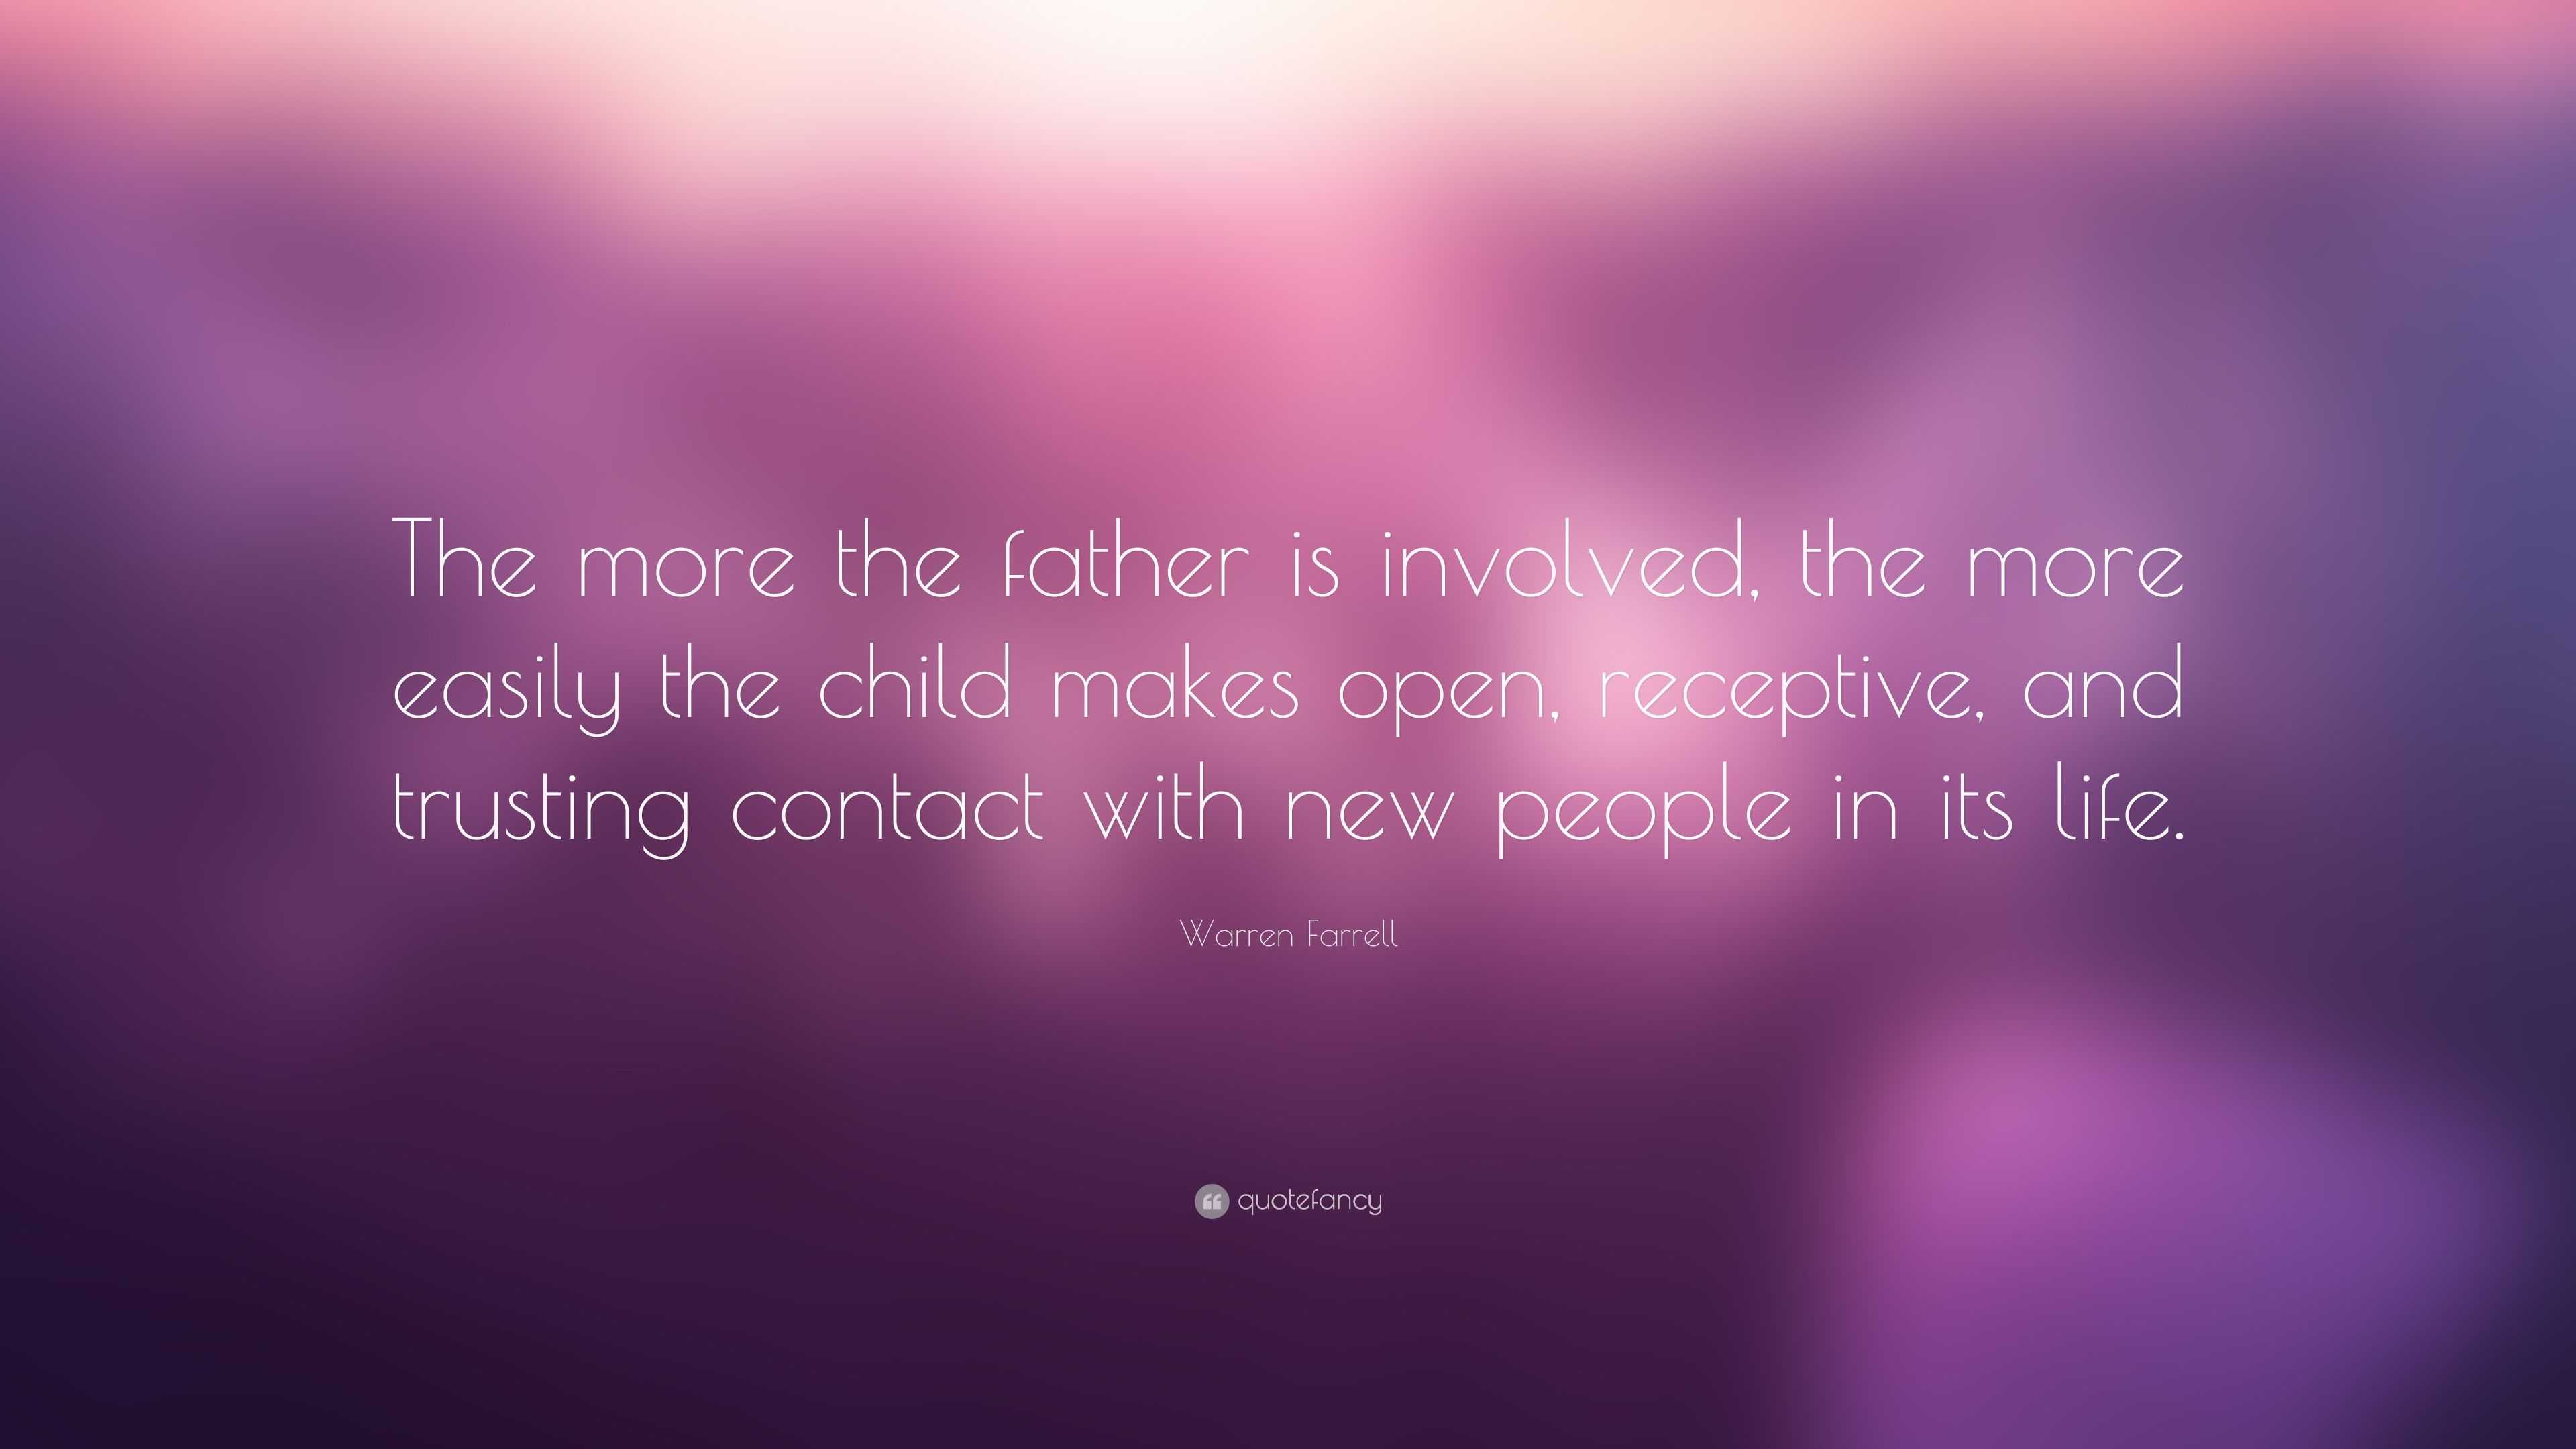 Warren Farrell Quote: “The more the father is involved, the more easily